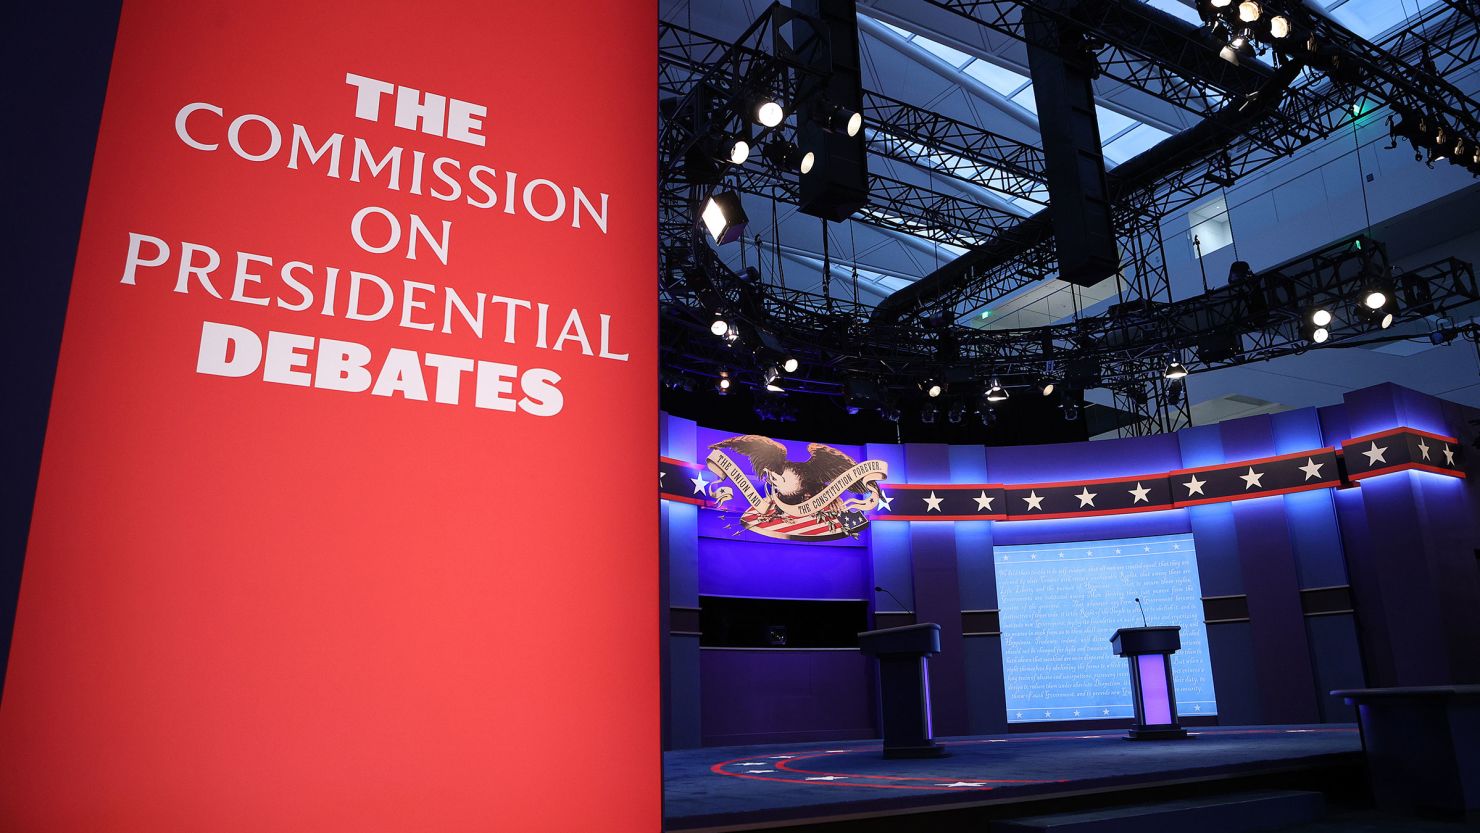 In this September 2020 file photo, the debate stage is set for then-President Donald Trump and then-Democratic presidential nominee Joe Biden to participate in the first presidential debate at the Health Education Campus of Case Western Reserve University in Cleveland, Ohio.